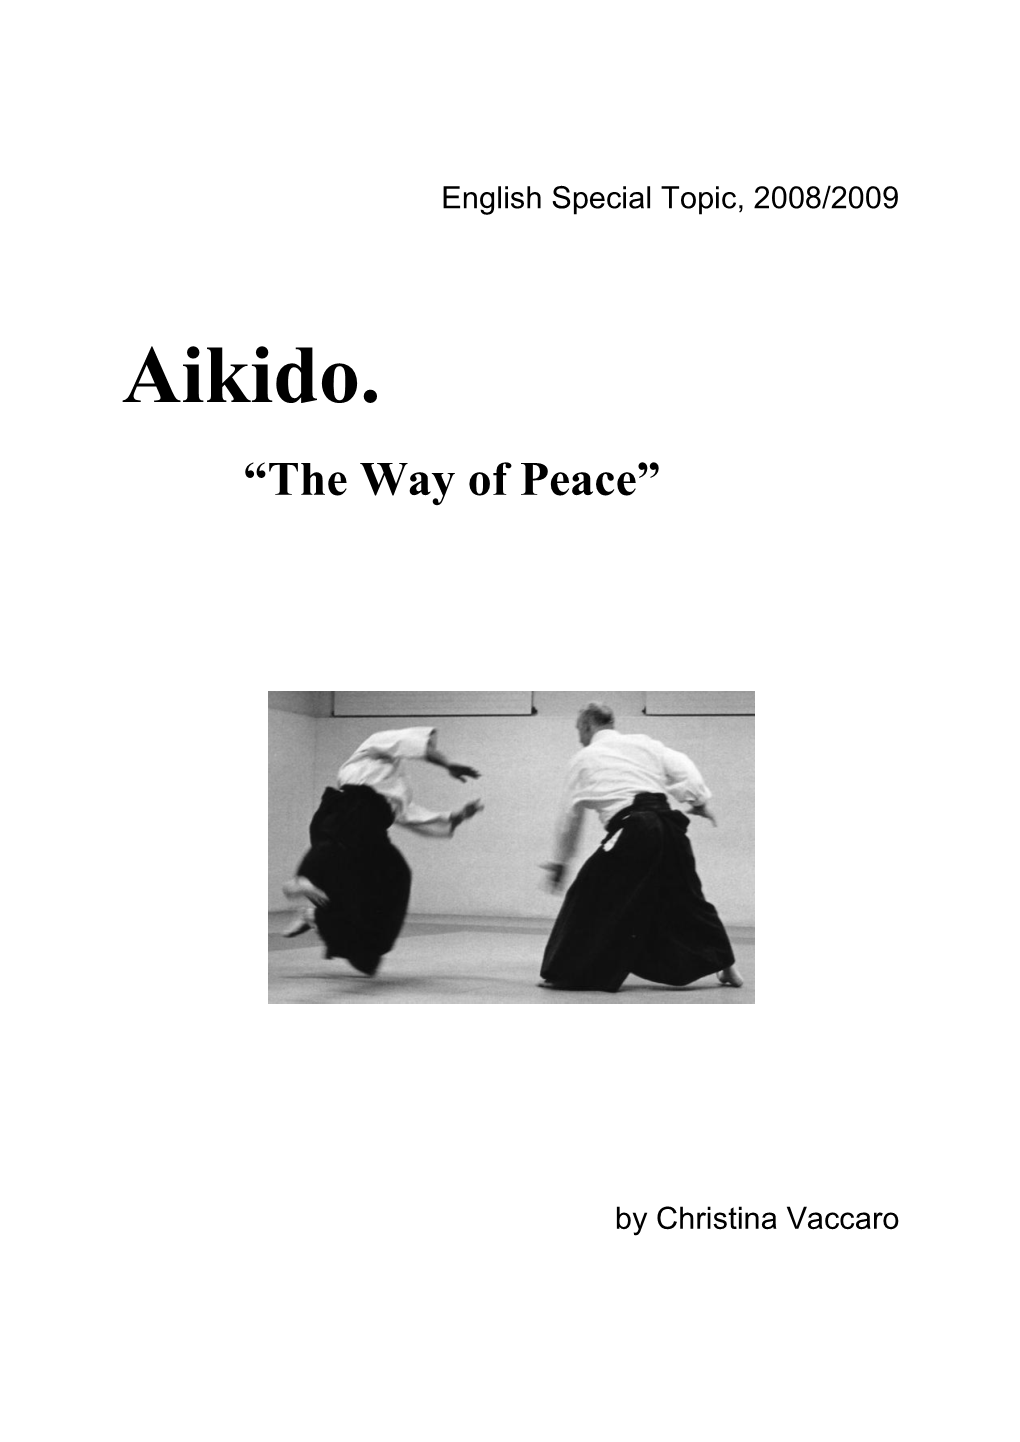 Aikido. “Theart of Peace”